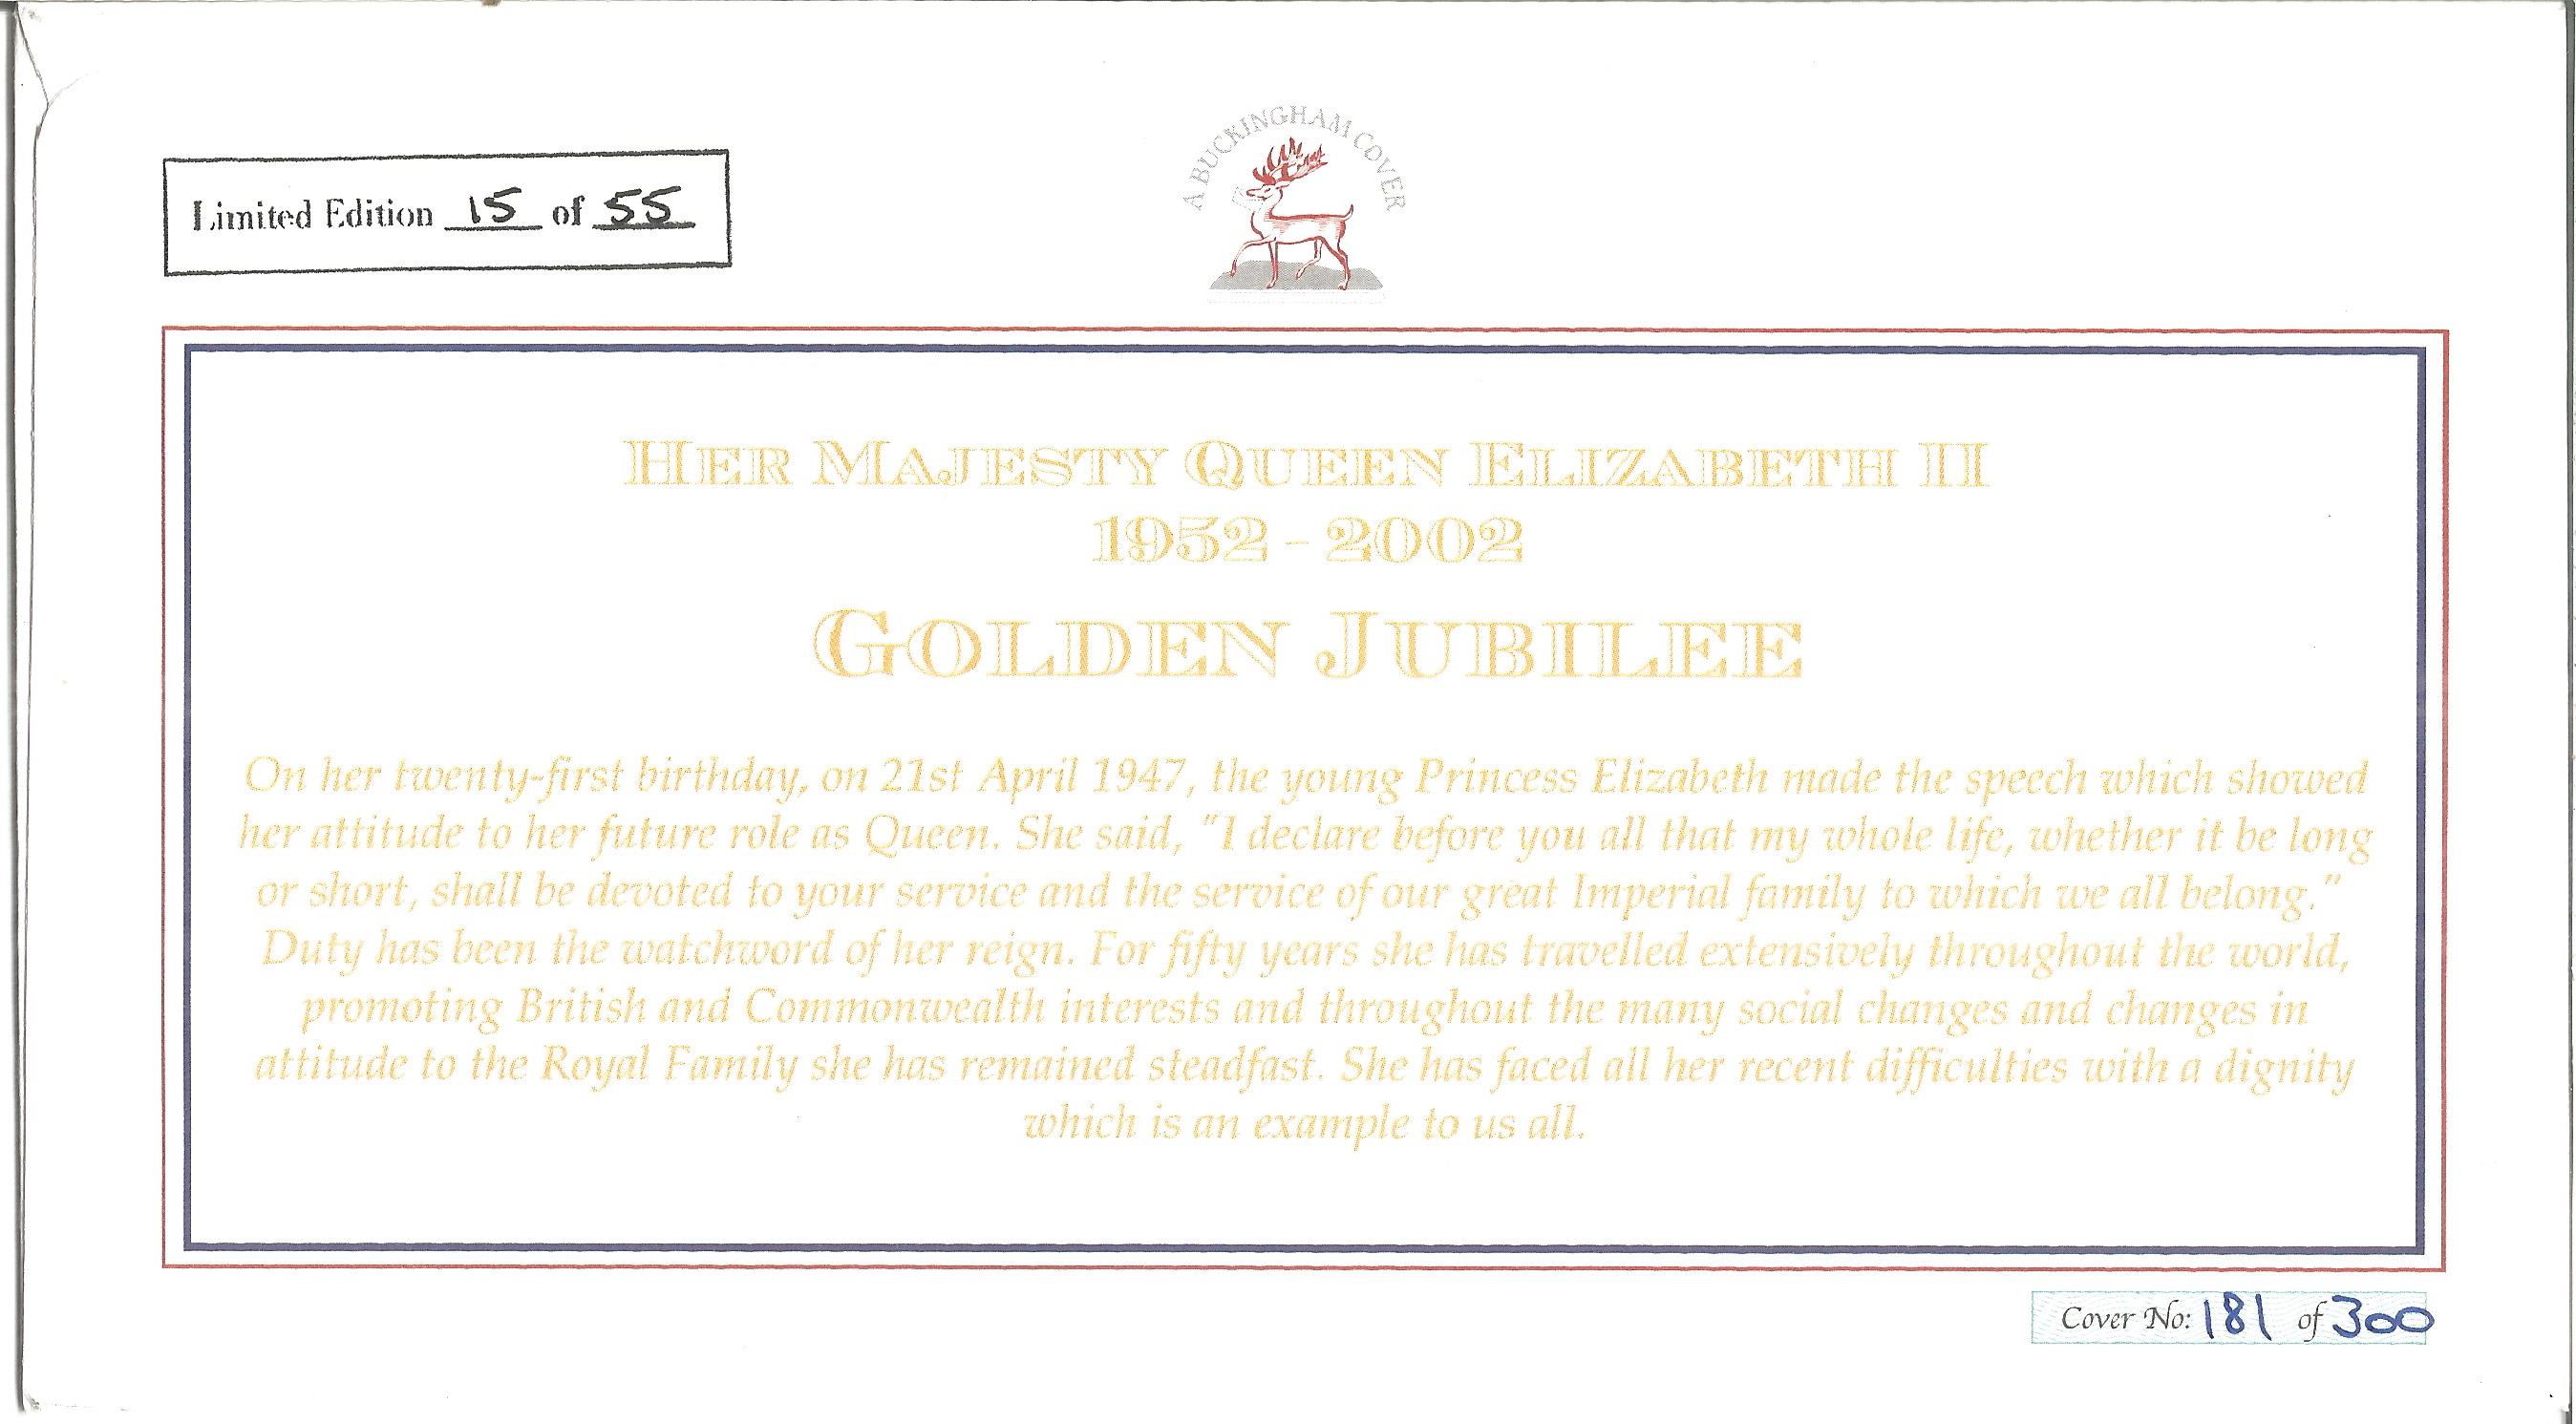 Long Live The Queen Golden Jubilee 1952 - 2002 unsigned Internetstamps official FDC cover No 181 - Image 2 of 2